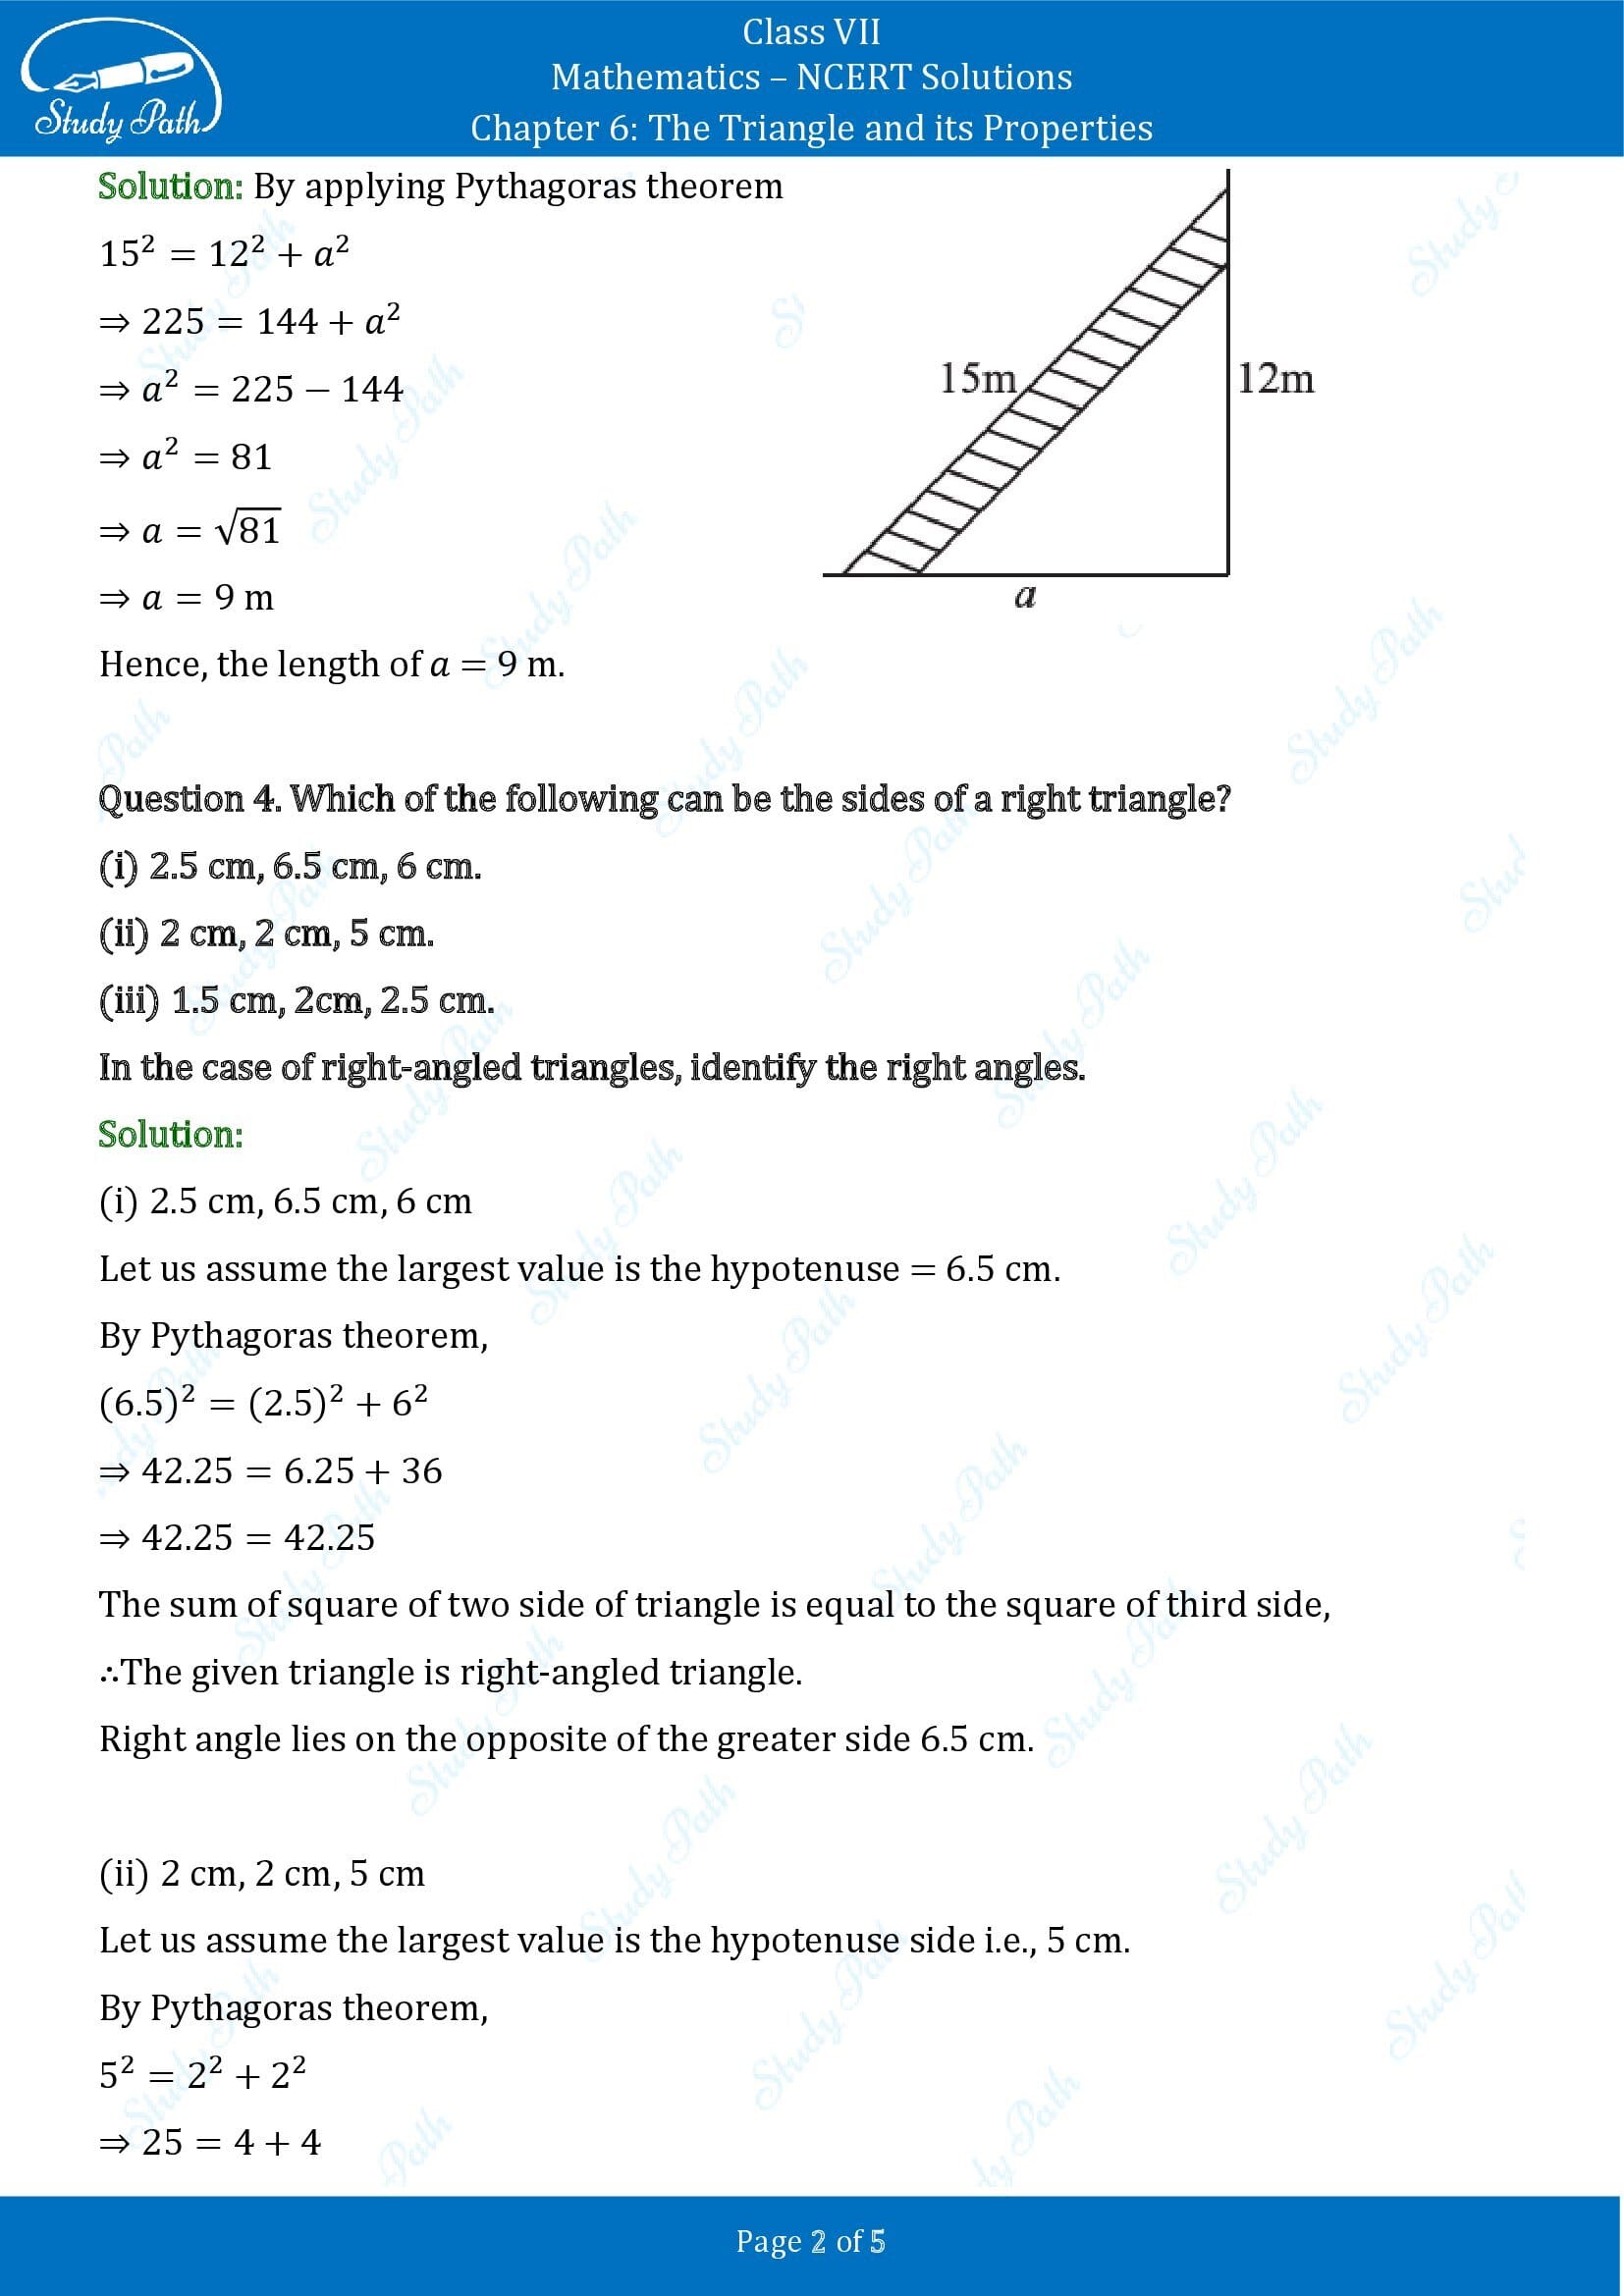 NCERT Solutions for Class 7 Maths Chapter 6 The Triangle and its Properties Exercise 6.5 00002